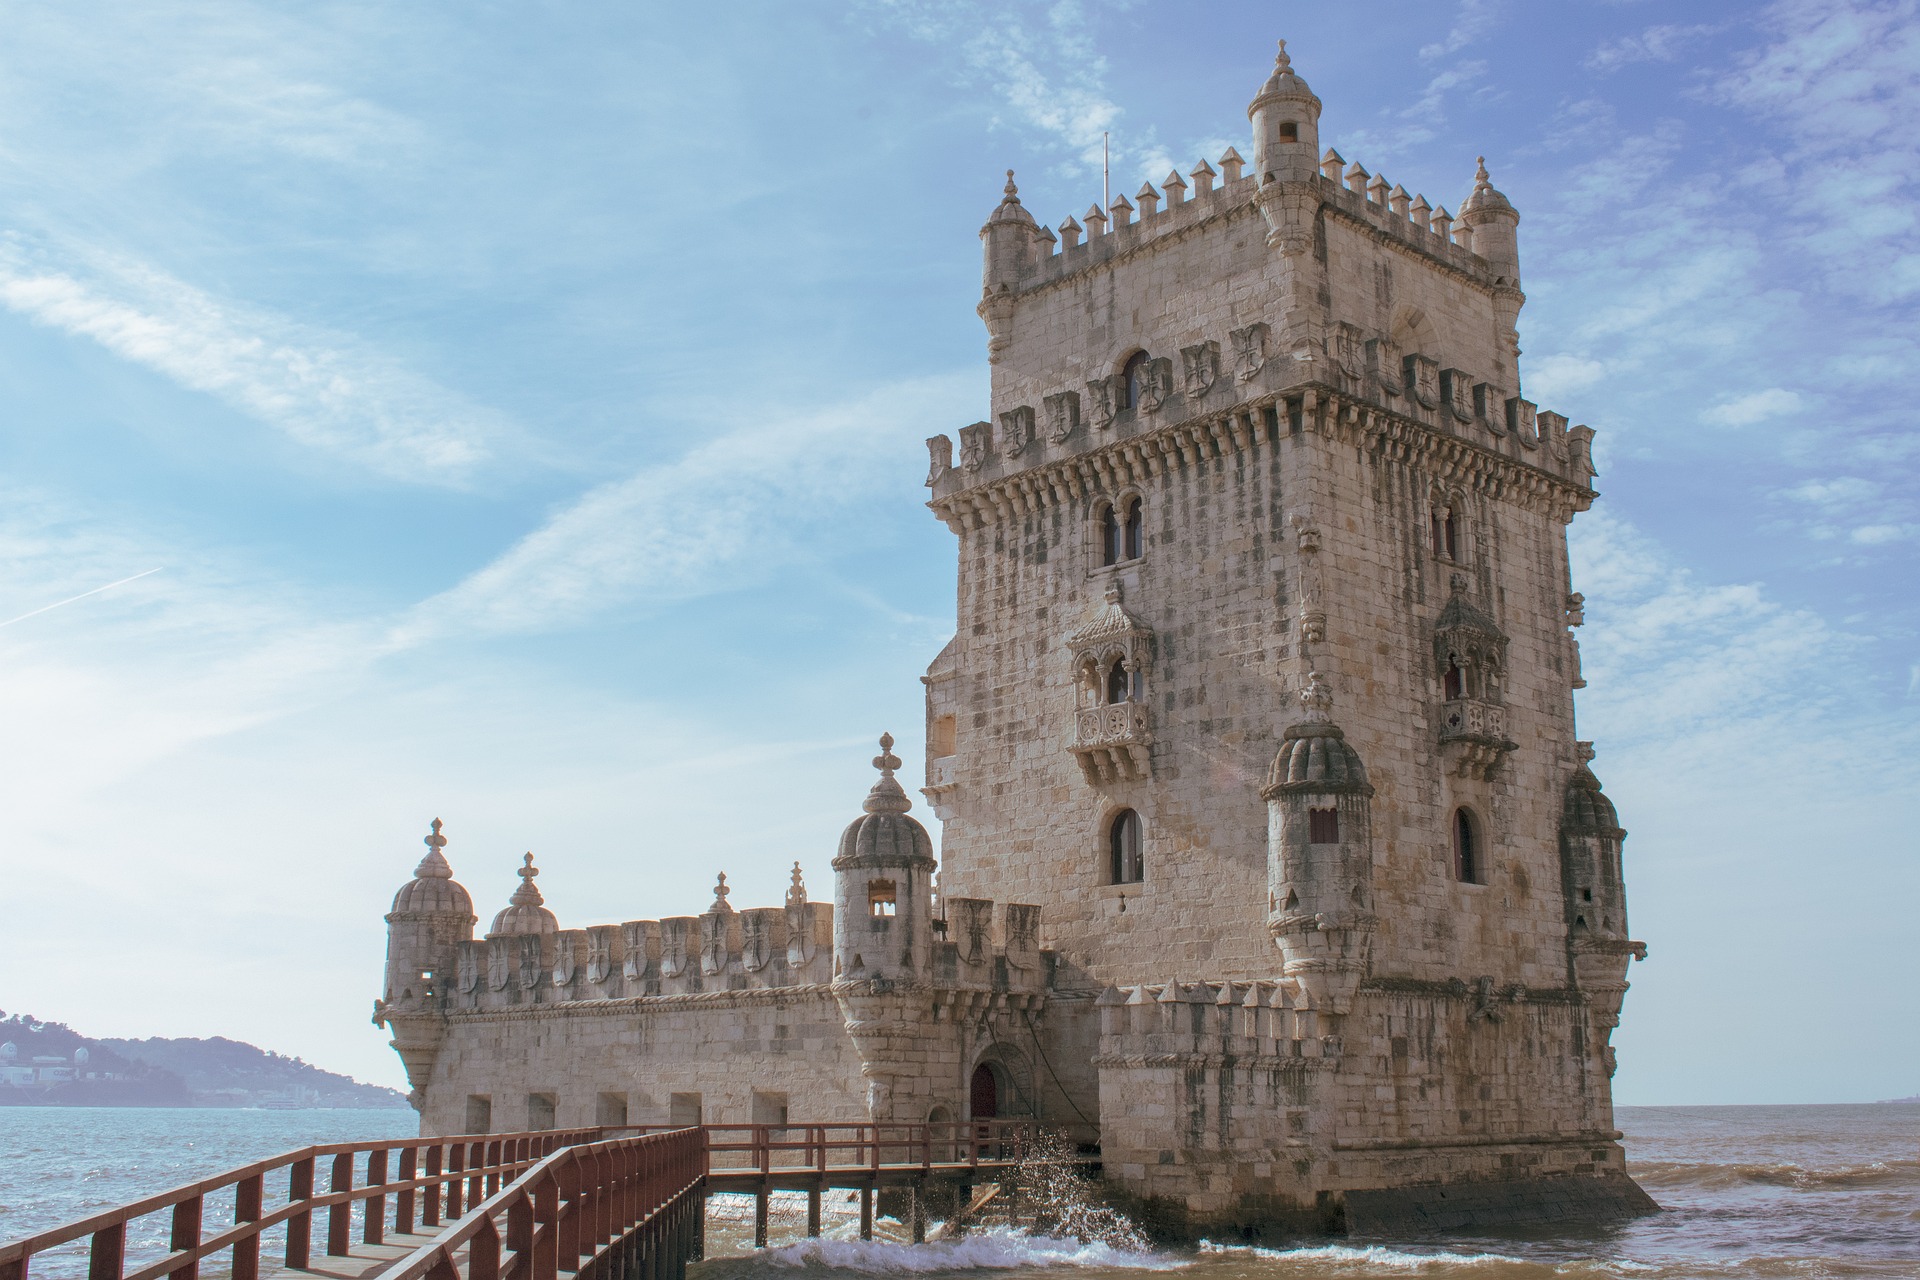 The Belem tower in Lisbon, Portugal